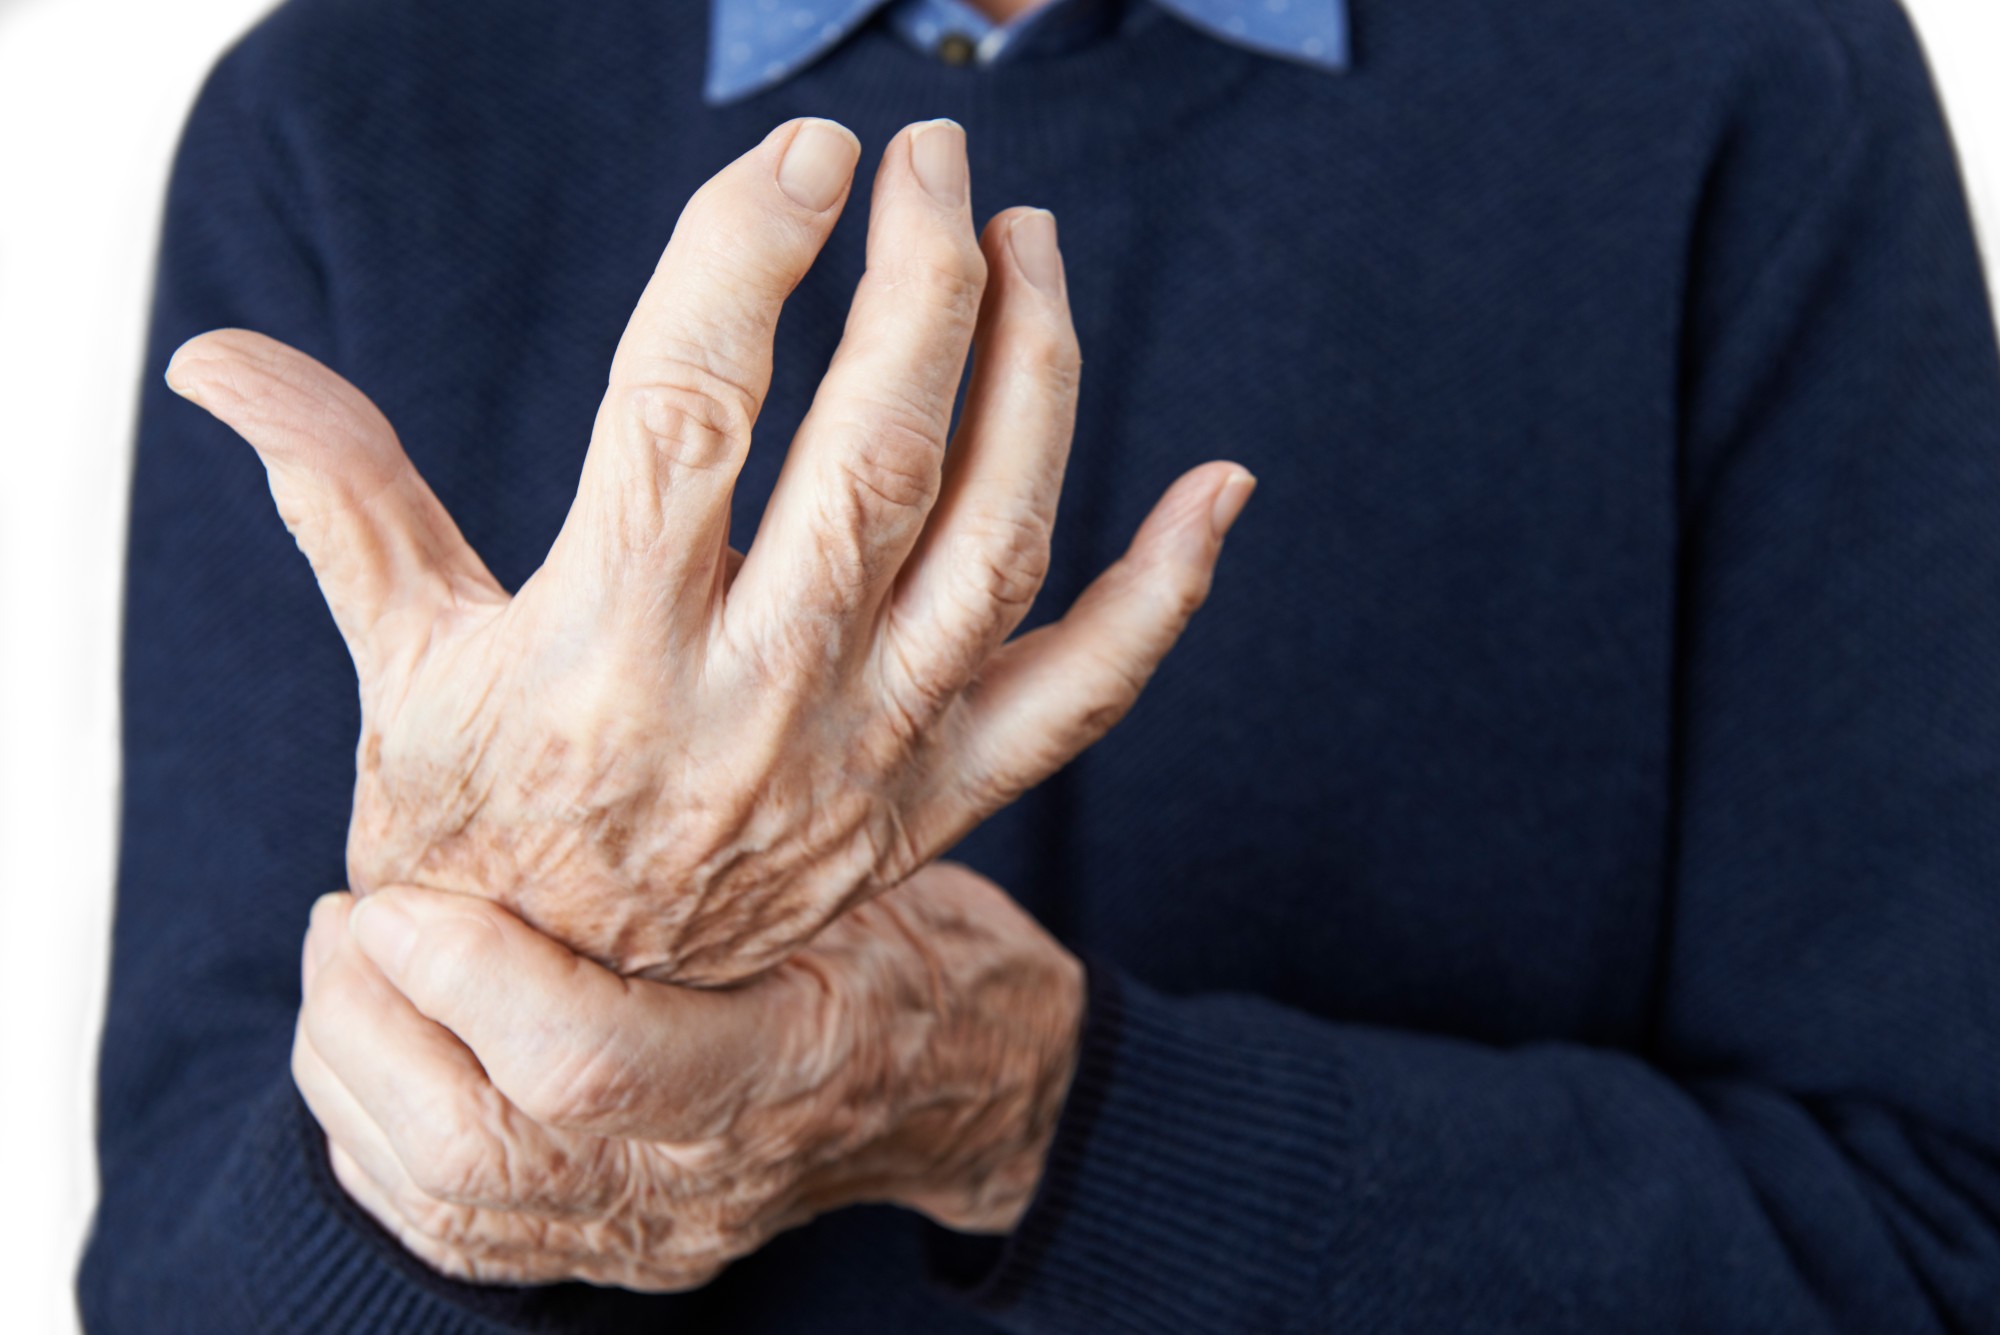 Parkinson’s disease: initial assessment and referral